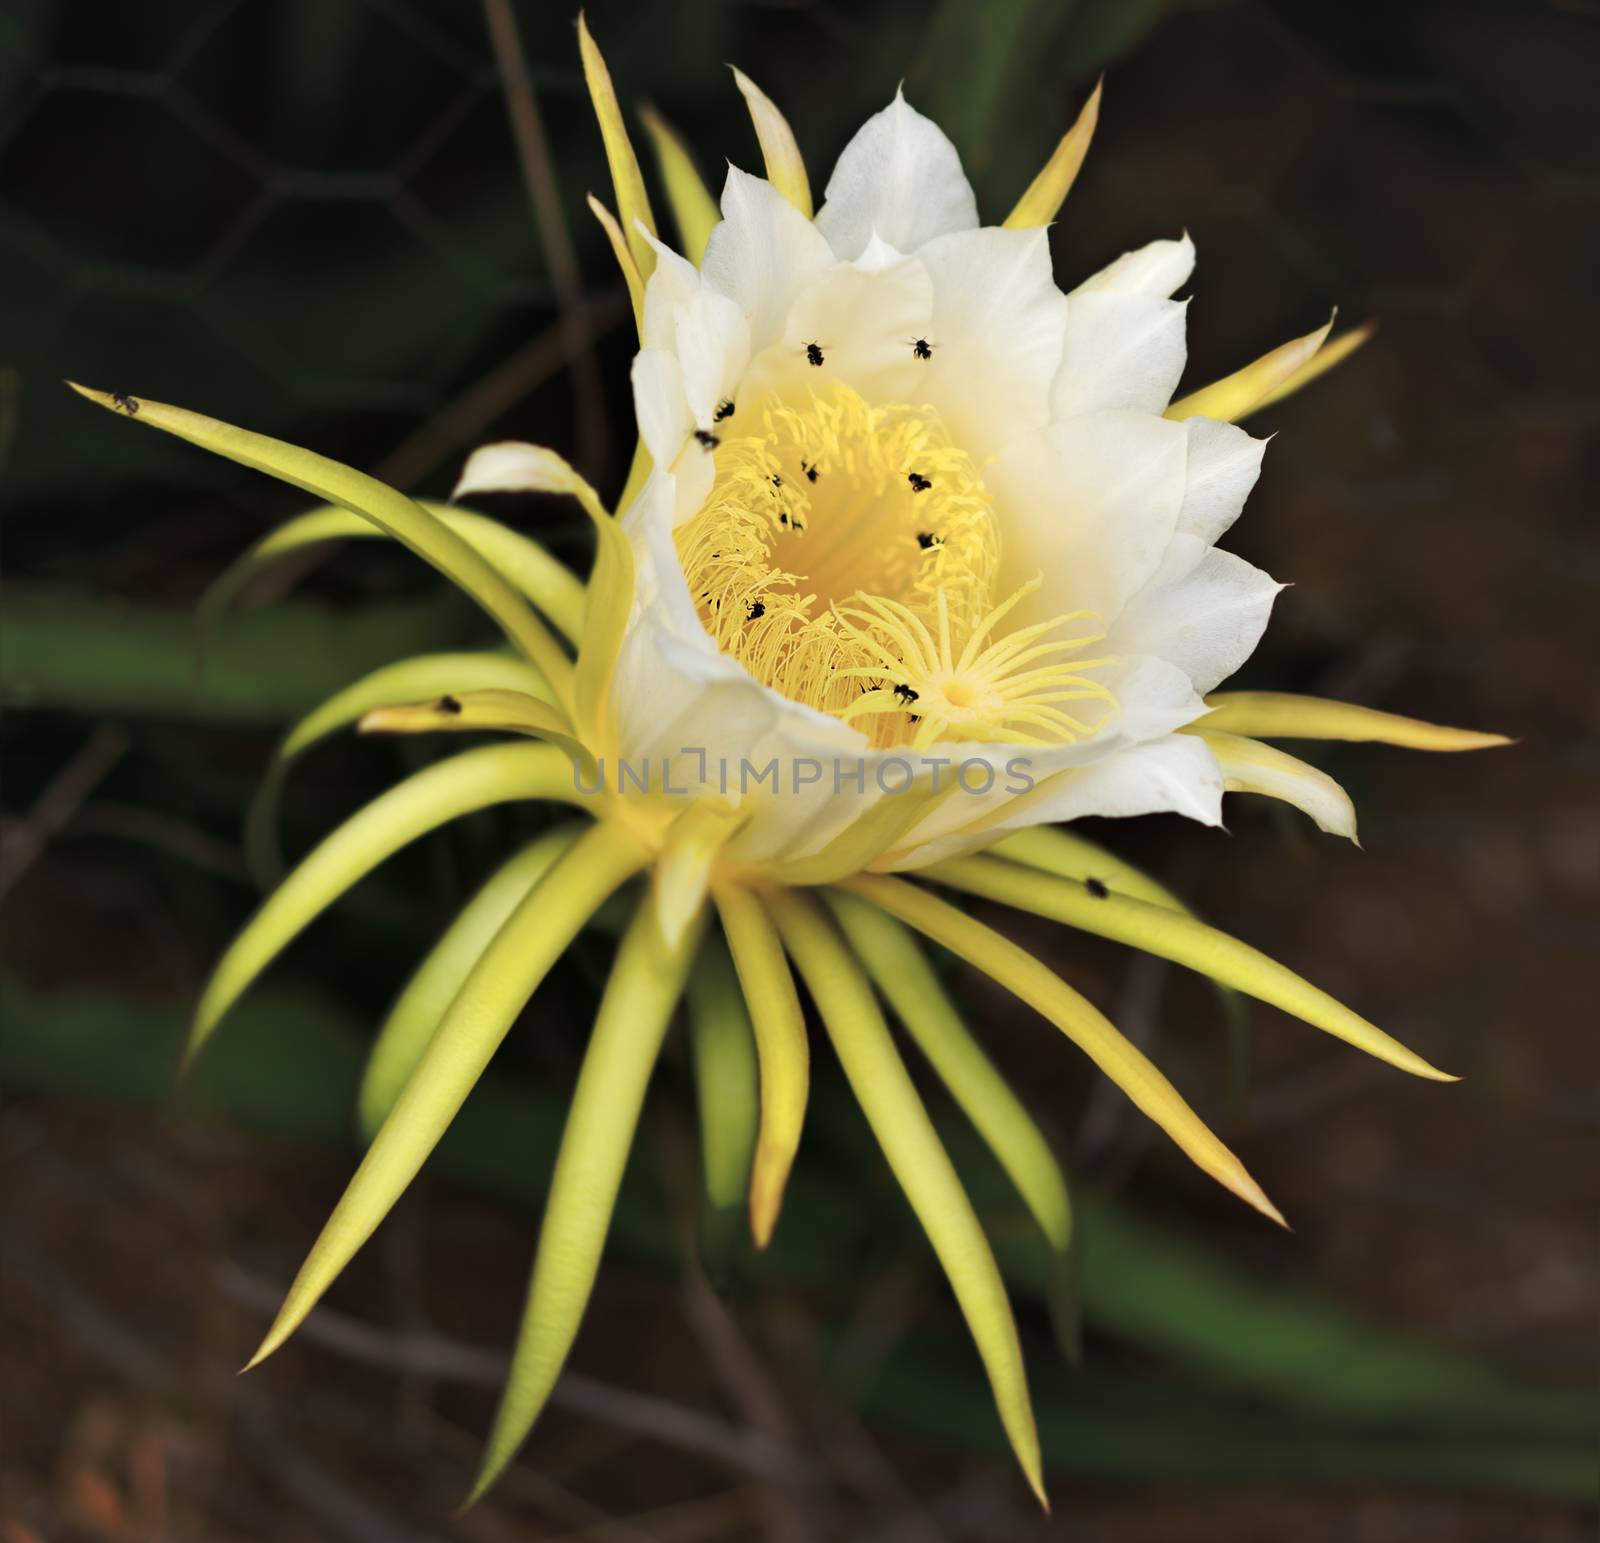 Large fragrant magnificent white flower of dragon fruit pollinated by Australian bees with a dark background